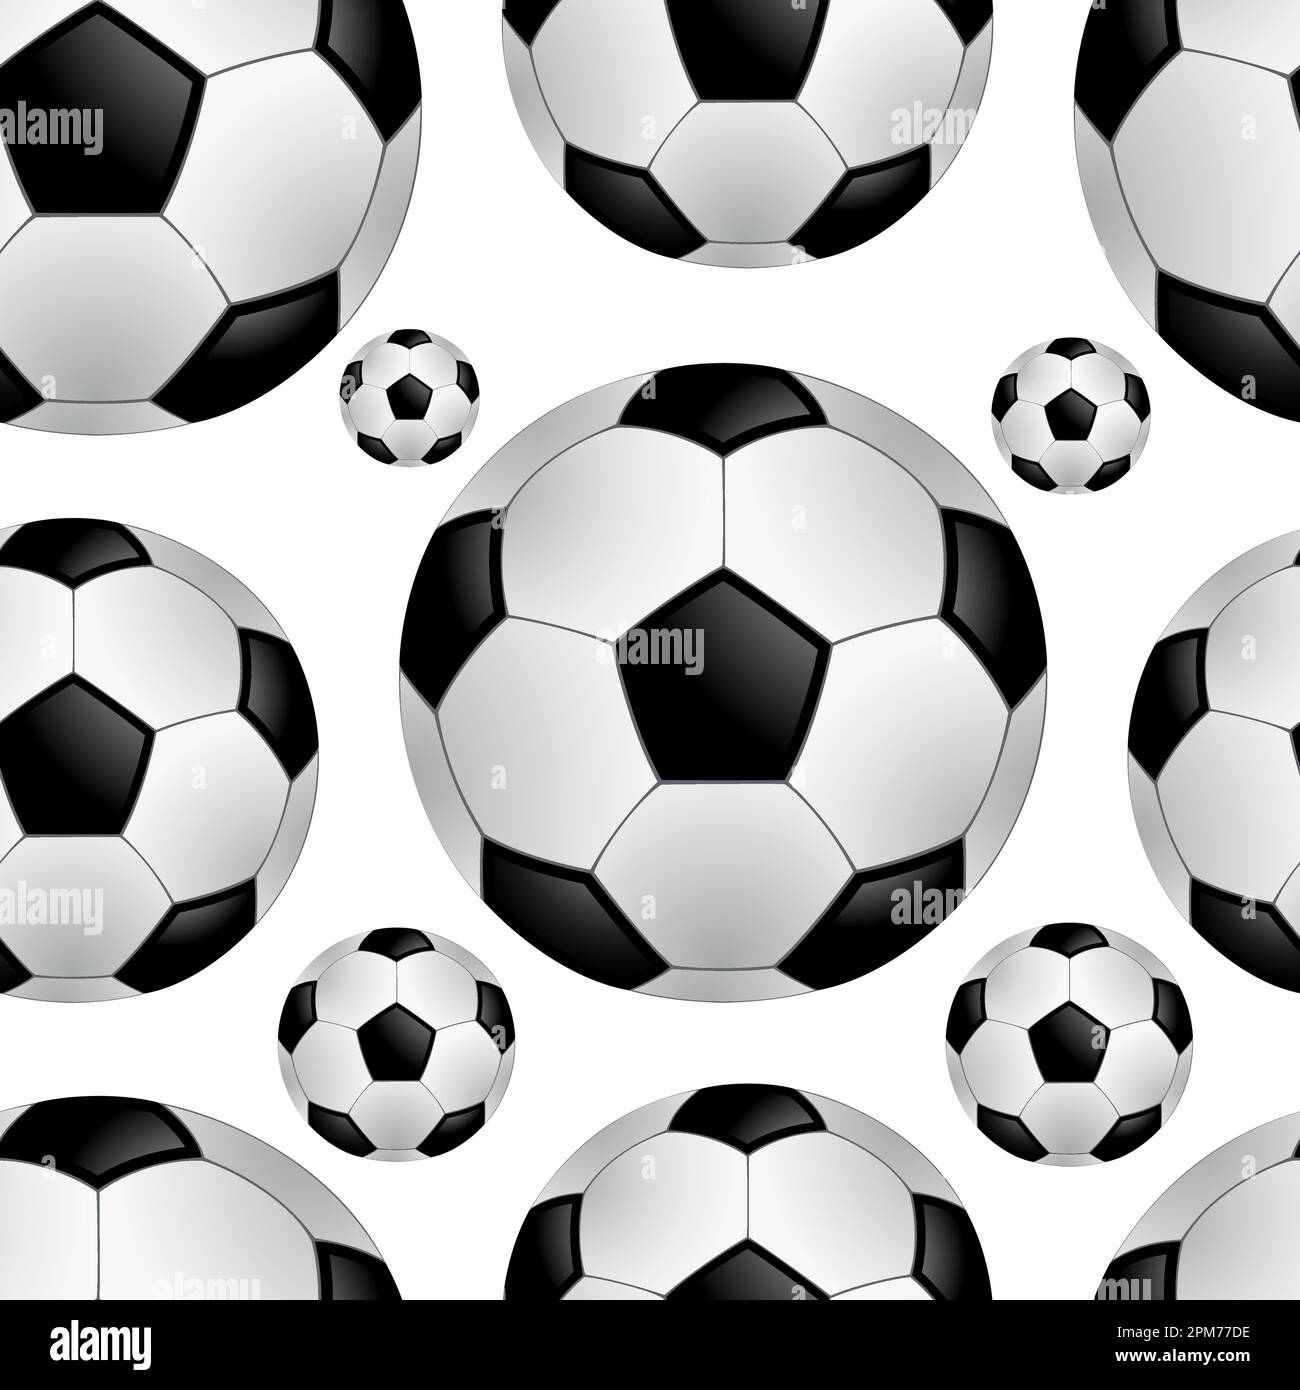 Football pattrent background Stock Vector